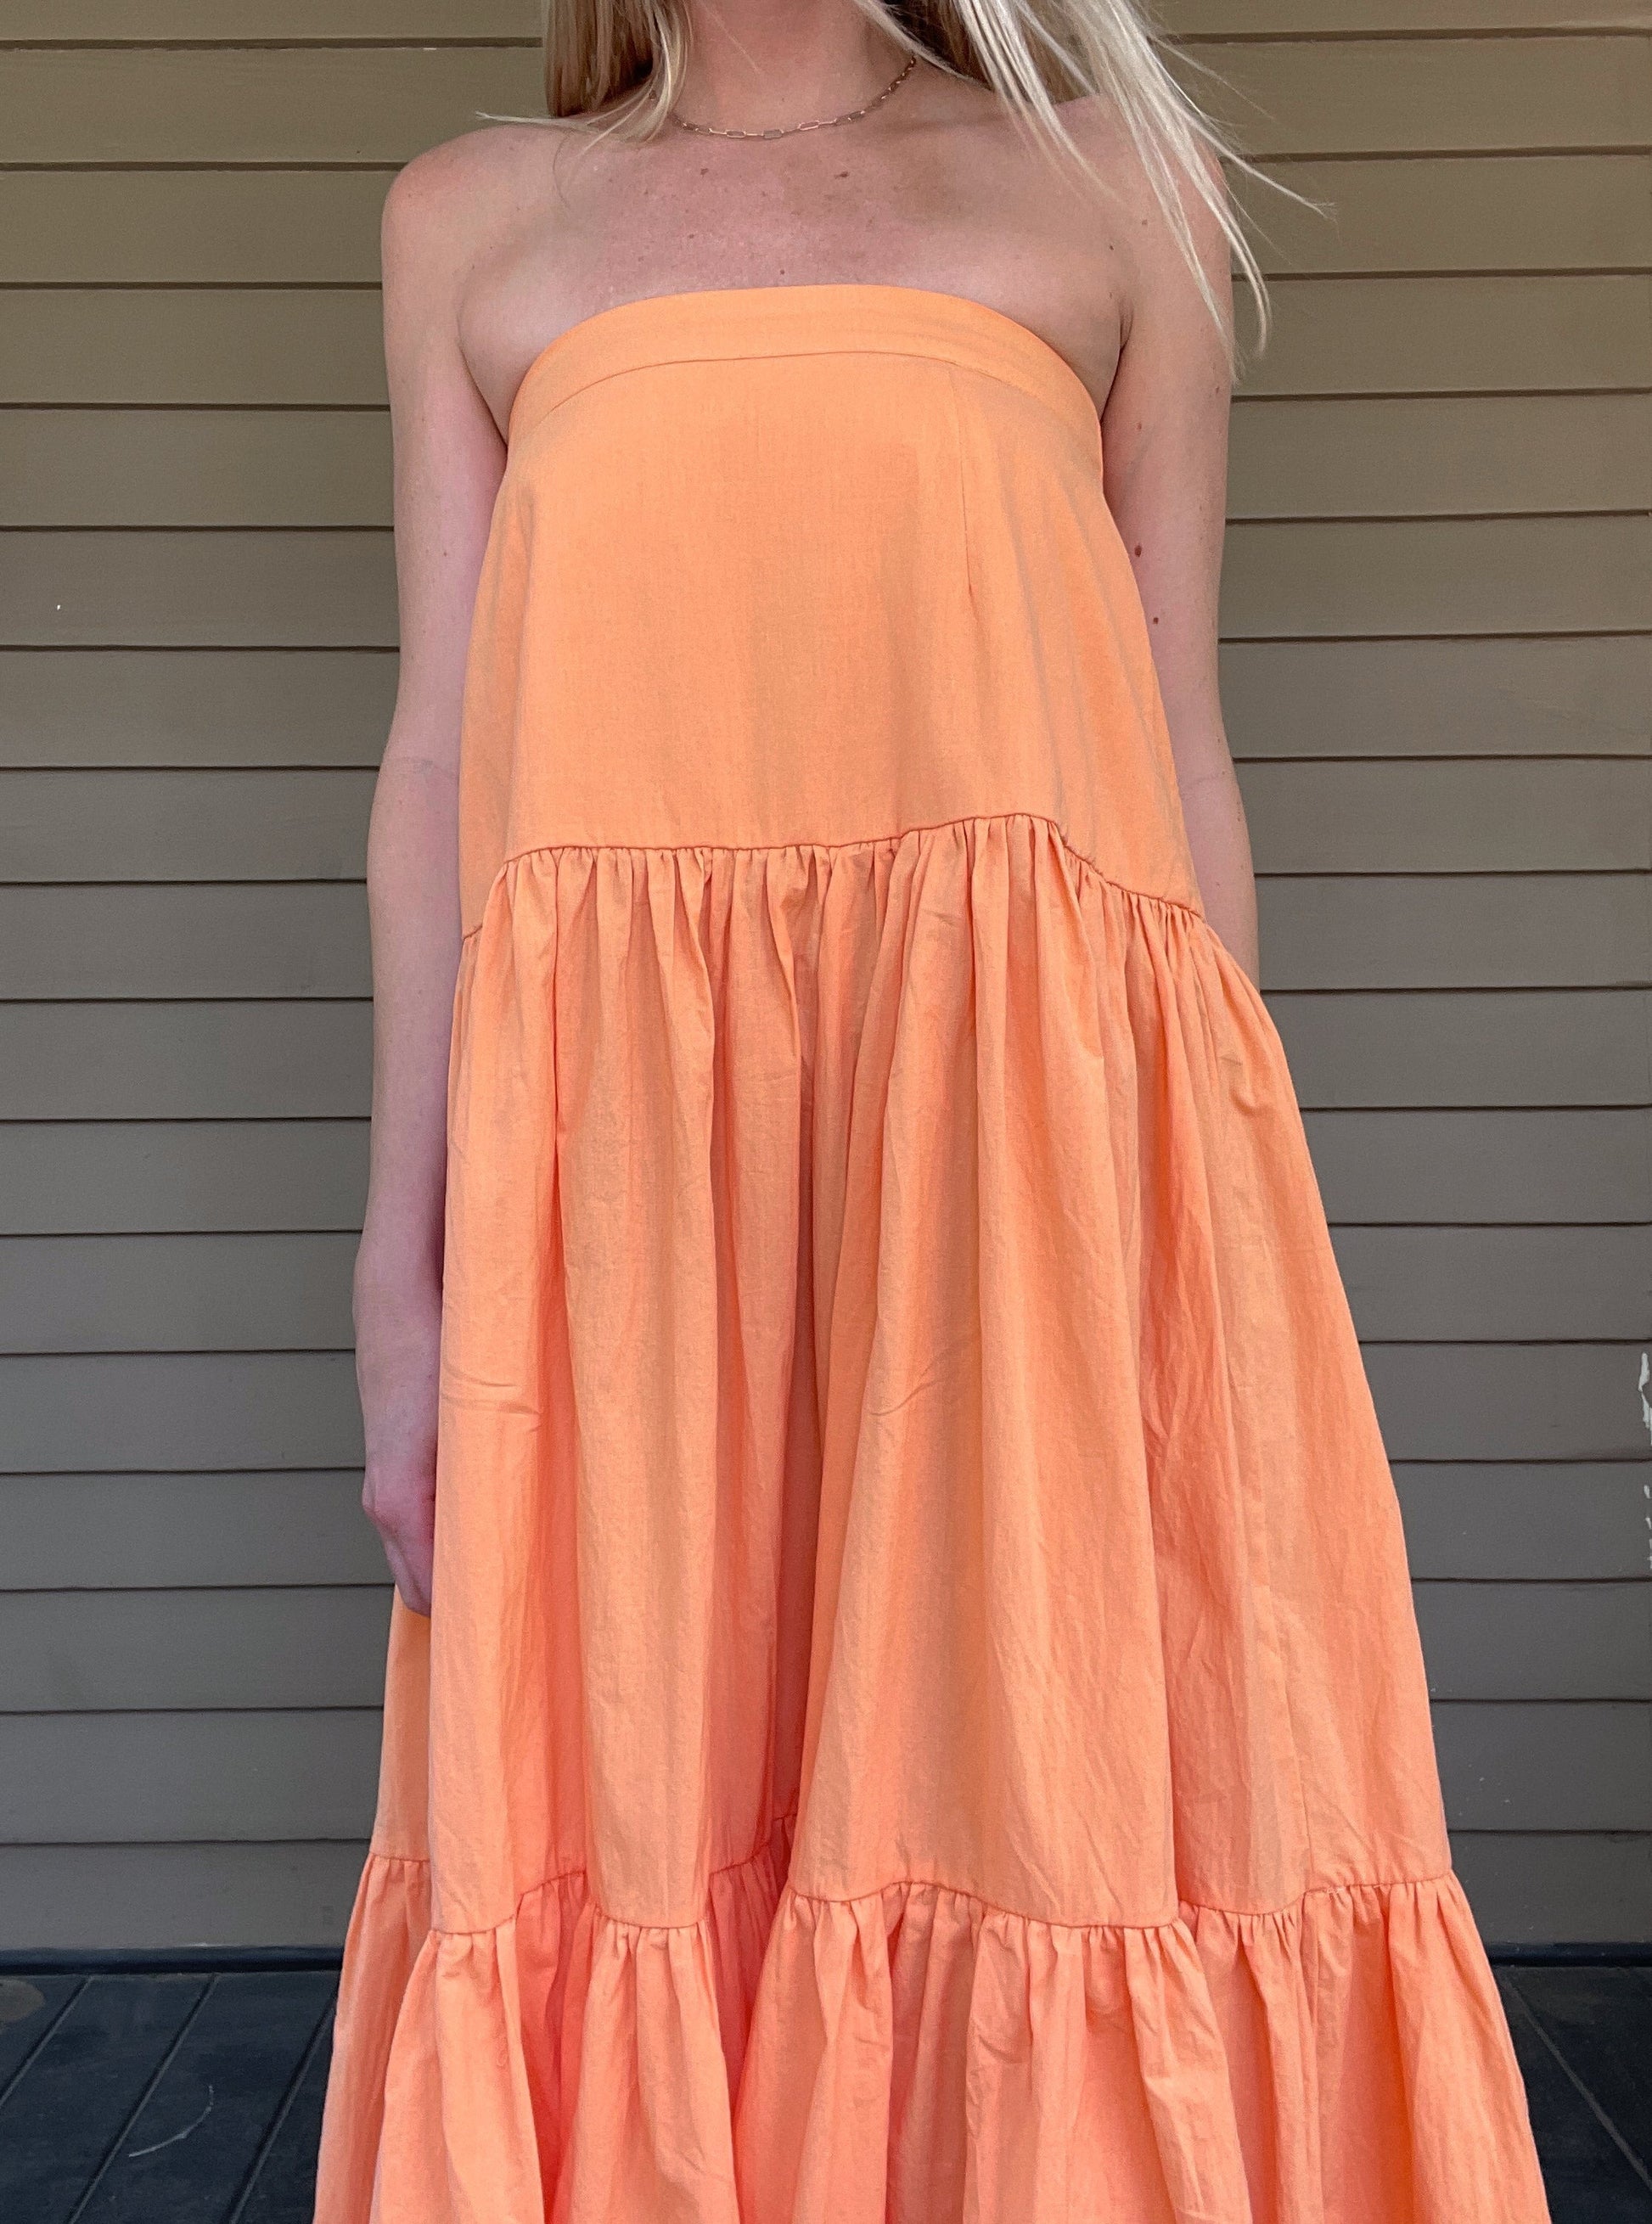 Twisted adjustable spaghetti strap tube crop top  Smocked back Flared ruffle tier maxi skirt Skirt has side invisible zipper Use skirt and wear it as a strapless tiered ruffle dress 100% Cotton Color: Orange This oversized romper is perfect for those cozy days or balmy summer nights. Made from premium material, this lightweight romper offers a breathable yet comfortable fit that won't weigh you down. Perfect with a pair of sandals or sneakers, this romper is sure to be a summer staple.